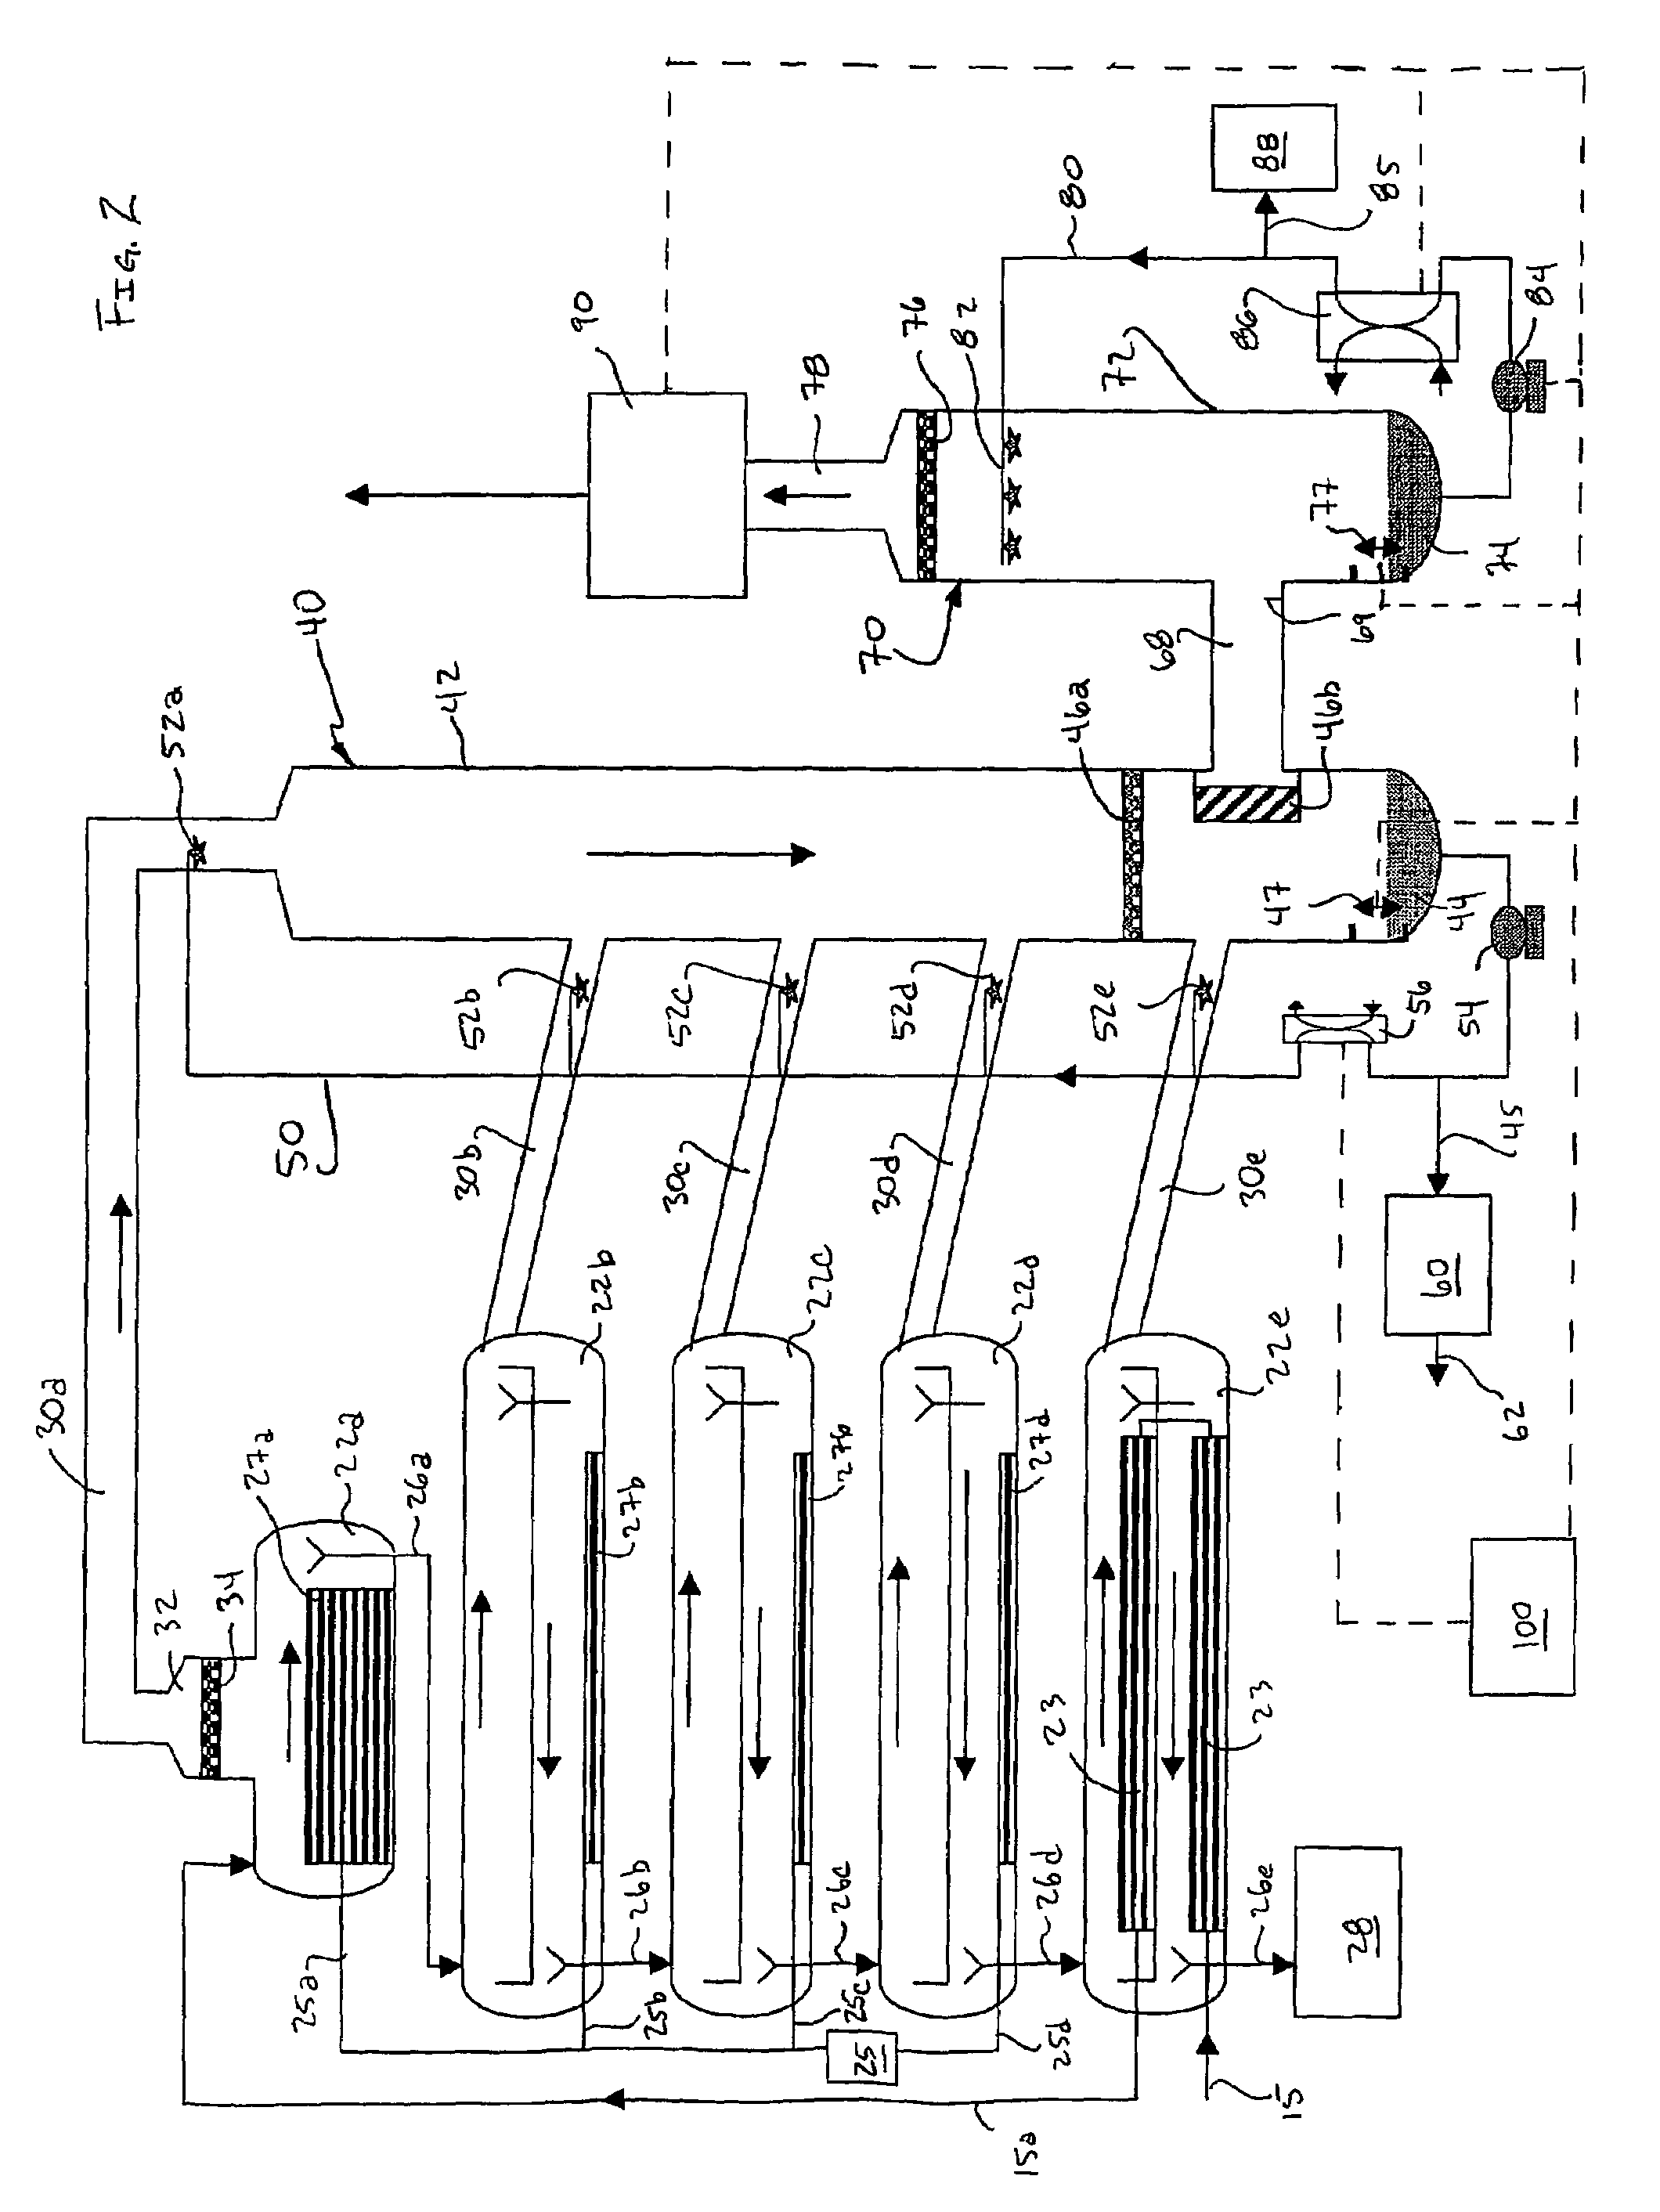 Method and apparatus for processing vegetable oils